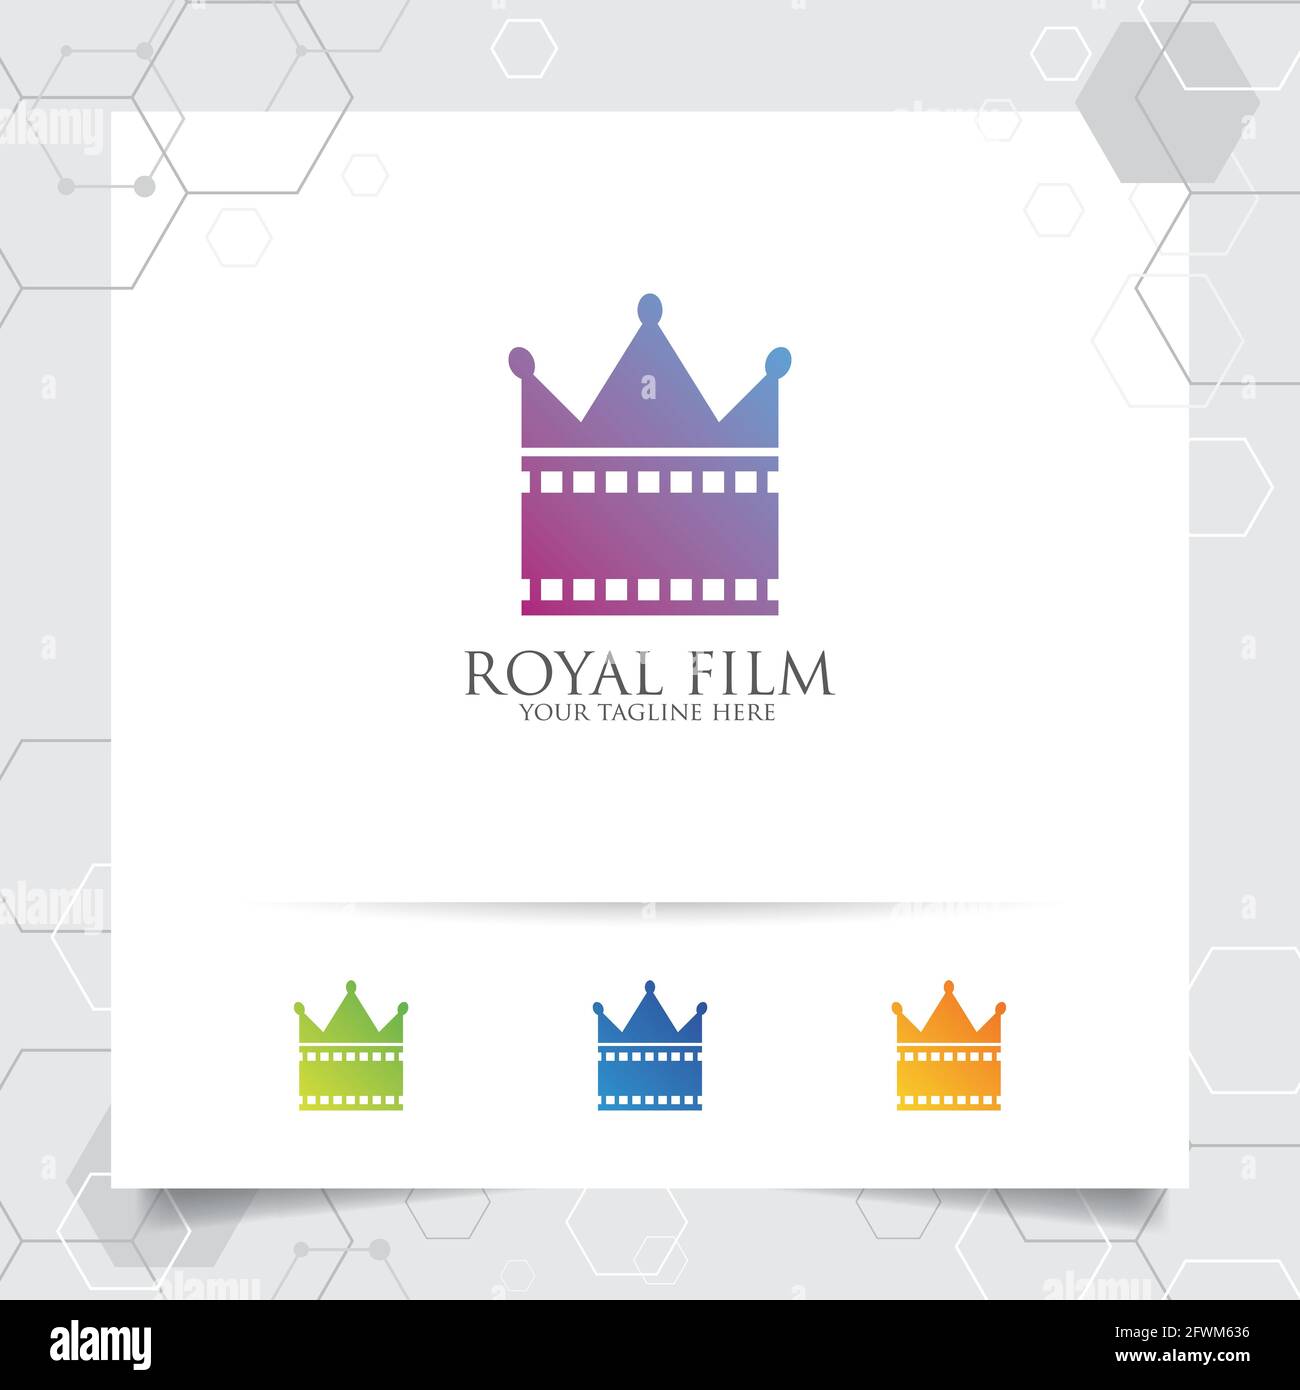 Film cinema logo vector with concept of film stip and crown icon design for recording studio, movie production, director and entertainment. Stock Vector